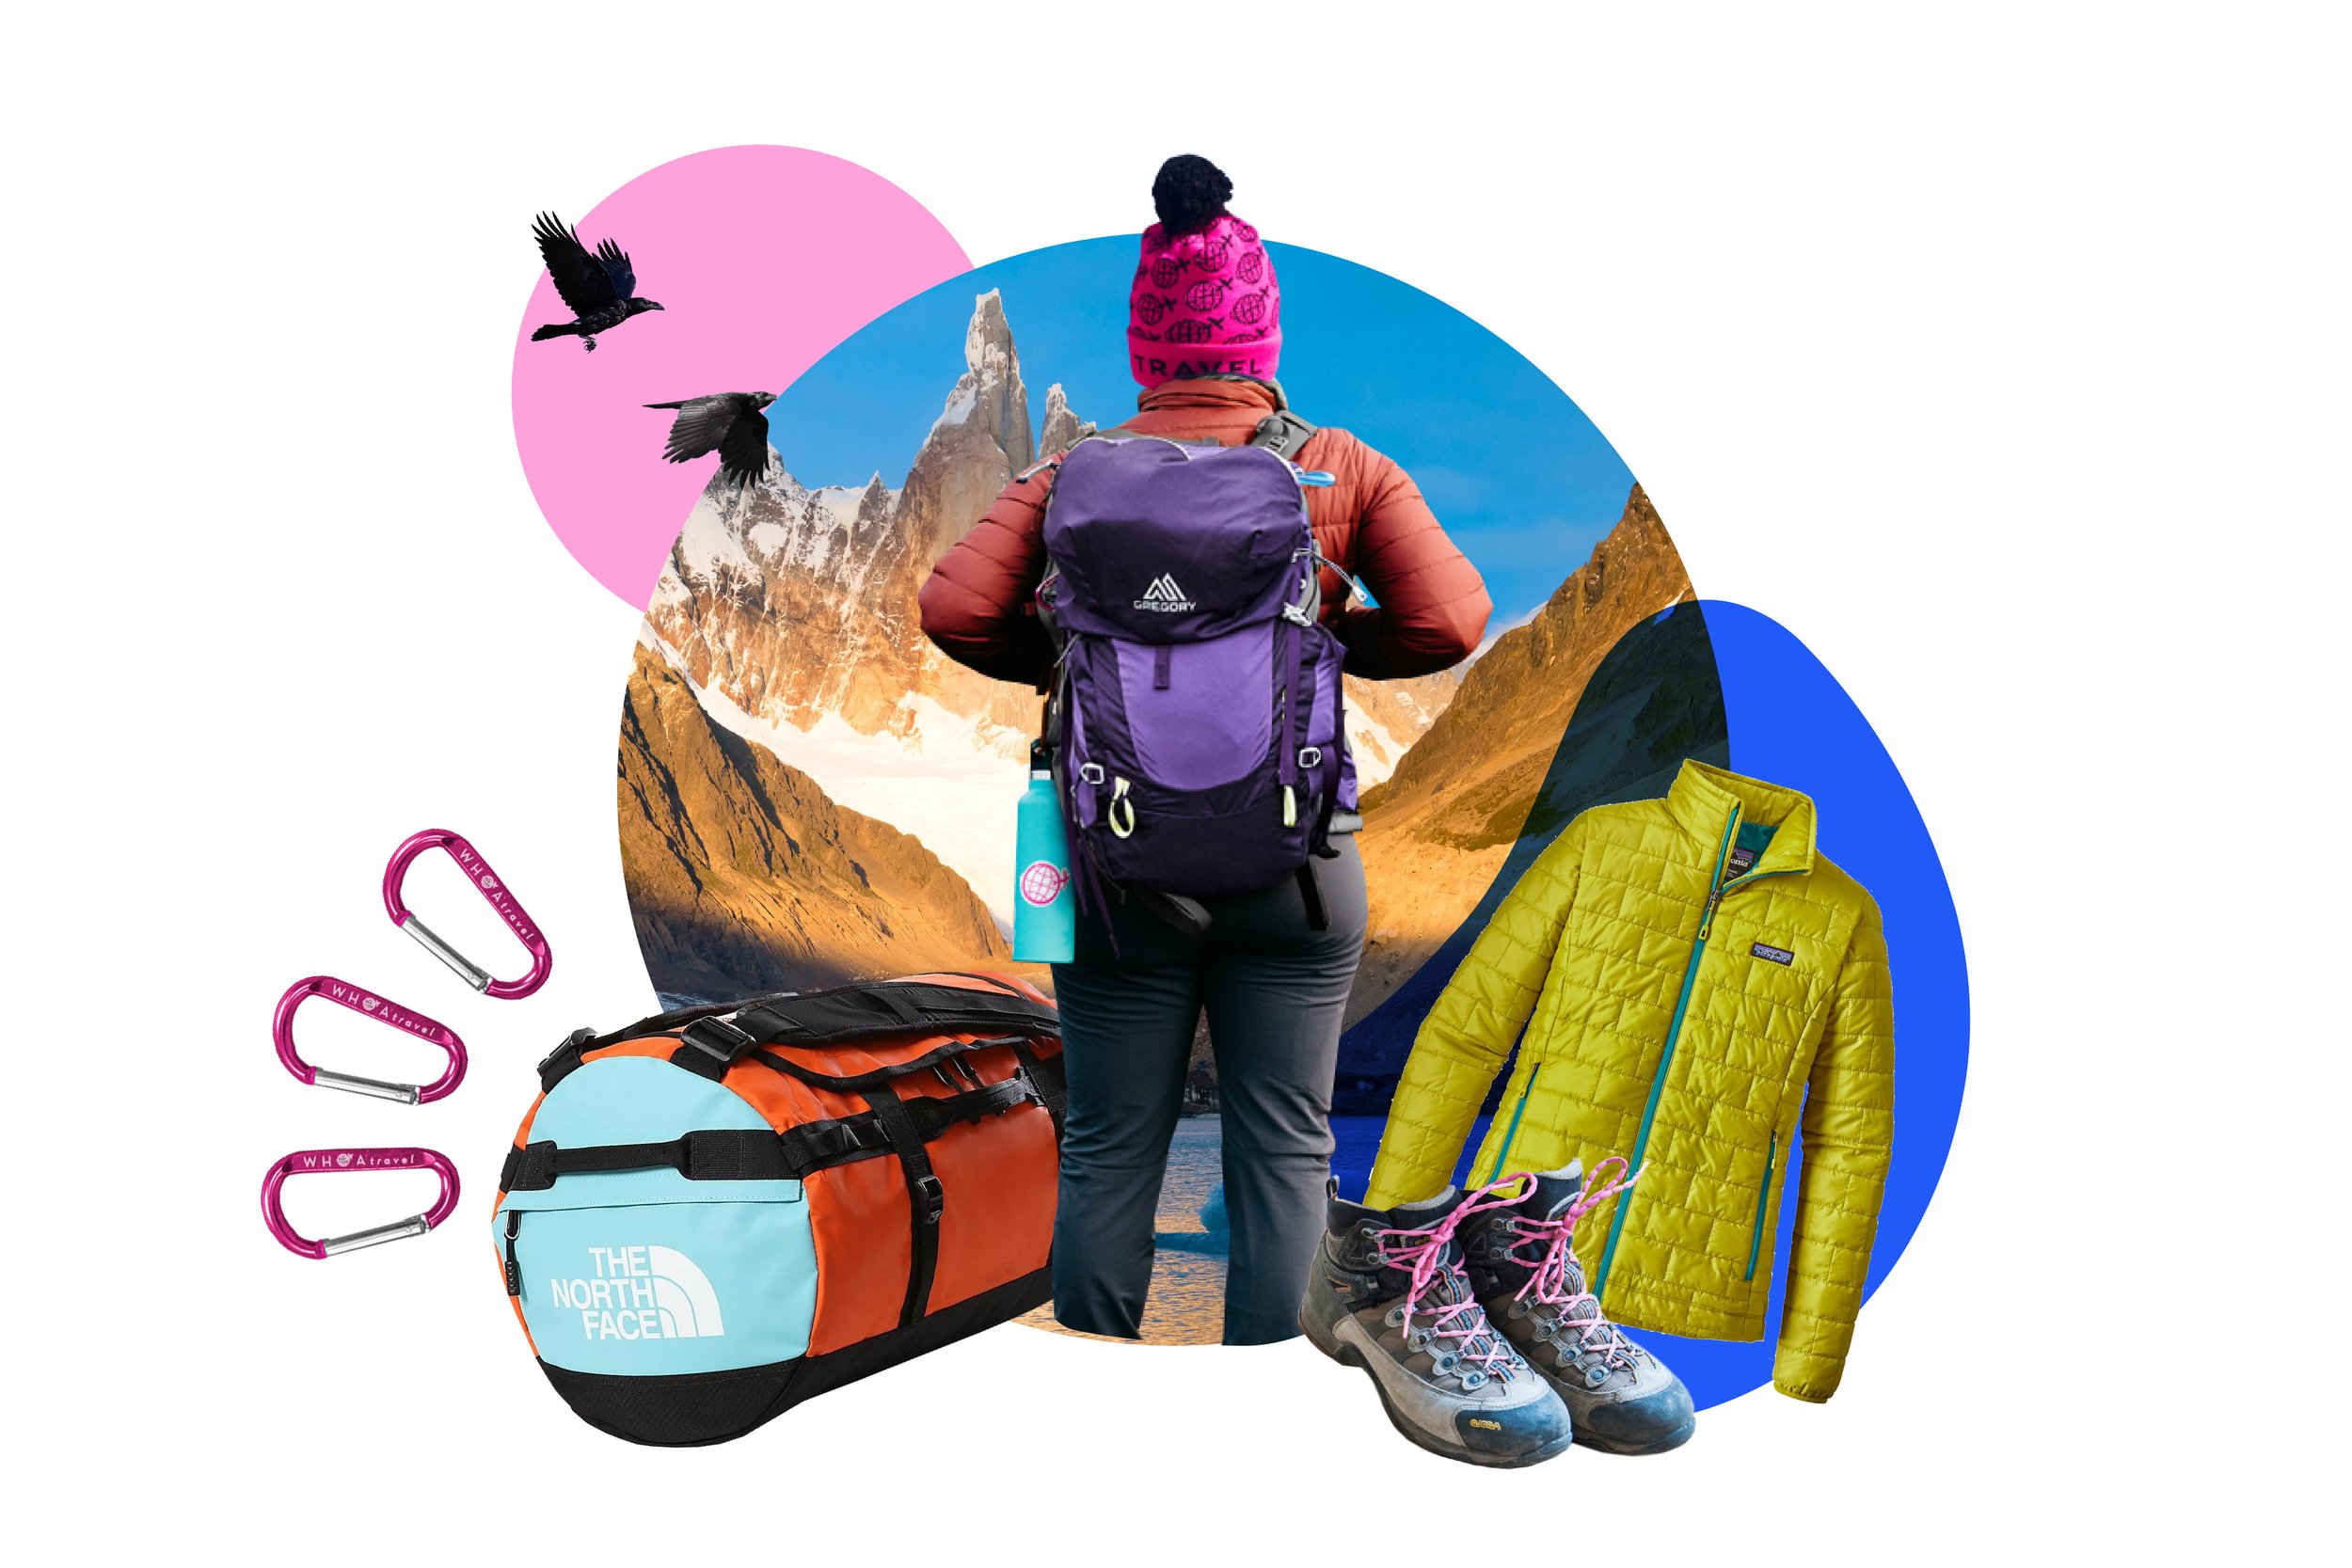 The Ultimate Patagonia Packing List - WHOA travel